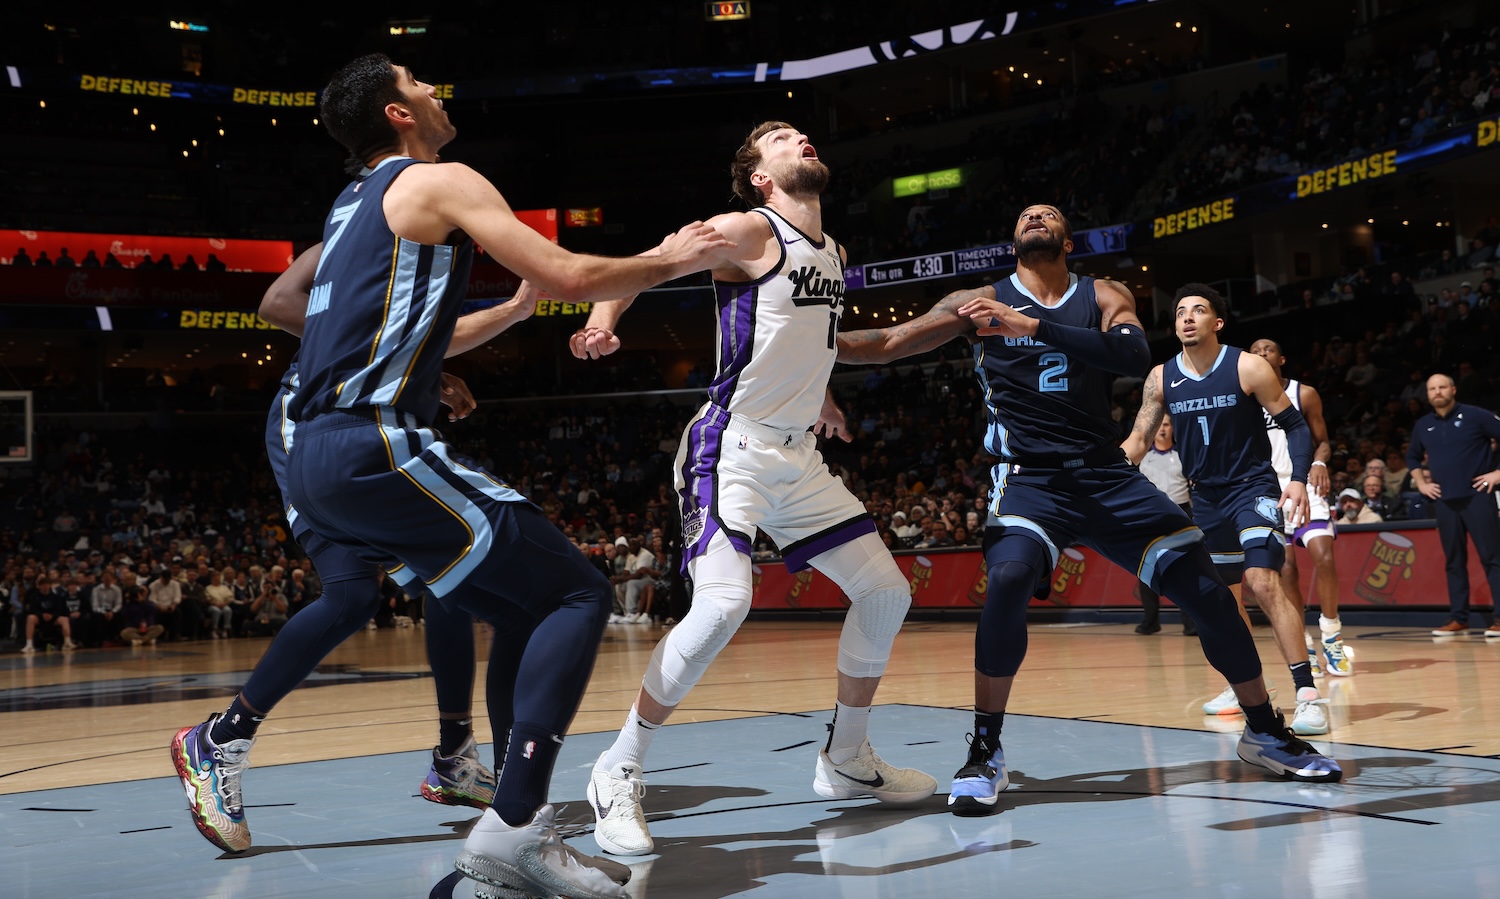 MEMPHIS, TN - JANUARY 29: Domantas Sabonis #10 of the Sacramento Kings looks for a rebound during the game against the Memphis Grizzlies on January 29, 2024 at FedExForum in Memphis, Tennessee. NOTE TO USER: User expressly acknowledges and agrees that, by downloading and or using this photograph, User is consenting to the terms and conditions of the Getty Images License Agreement. Mandatory Copyright Notice: Copyright 2024 NBAE (Photo by Joe Murphy/NBAE via Getty Images)